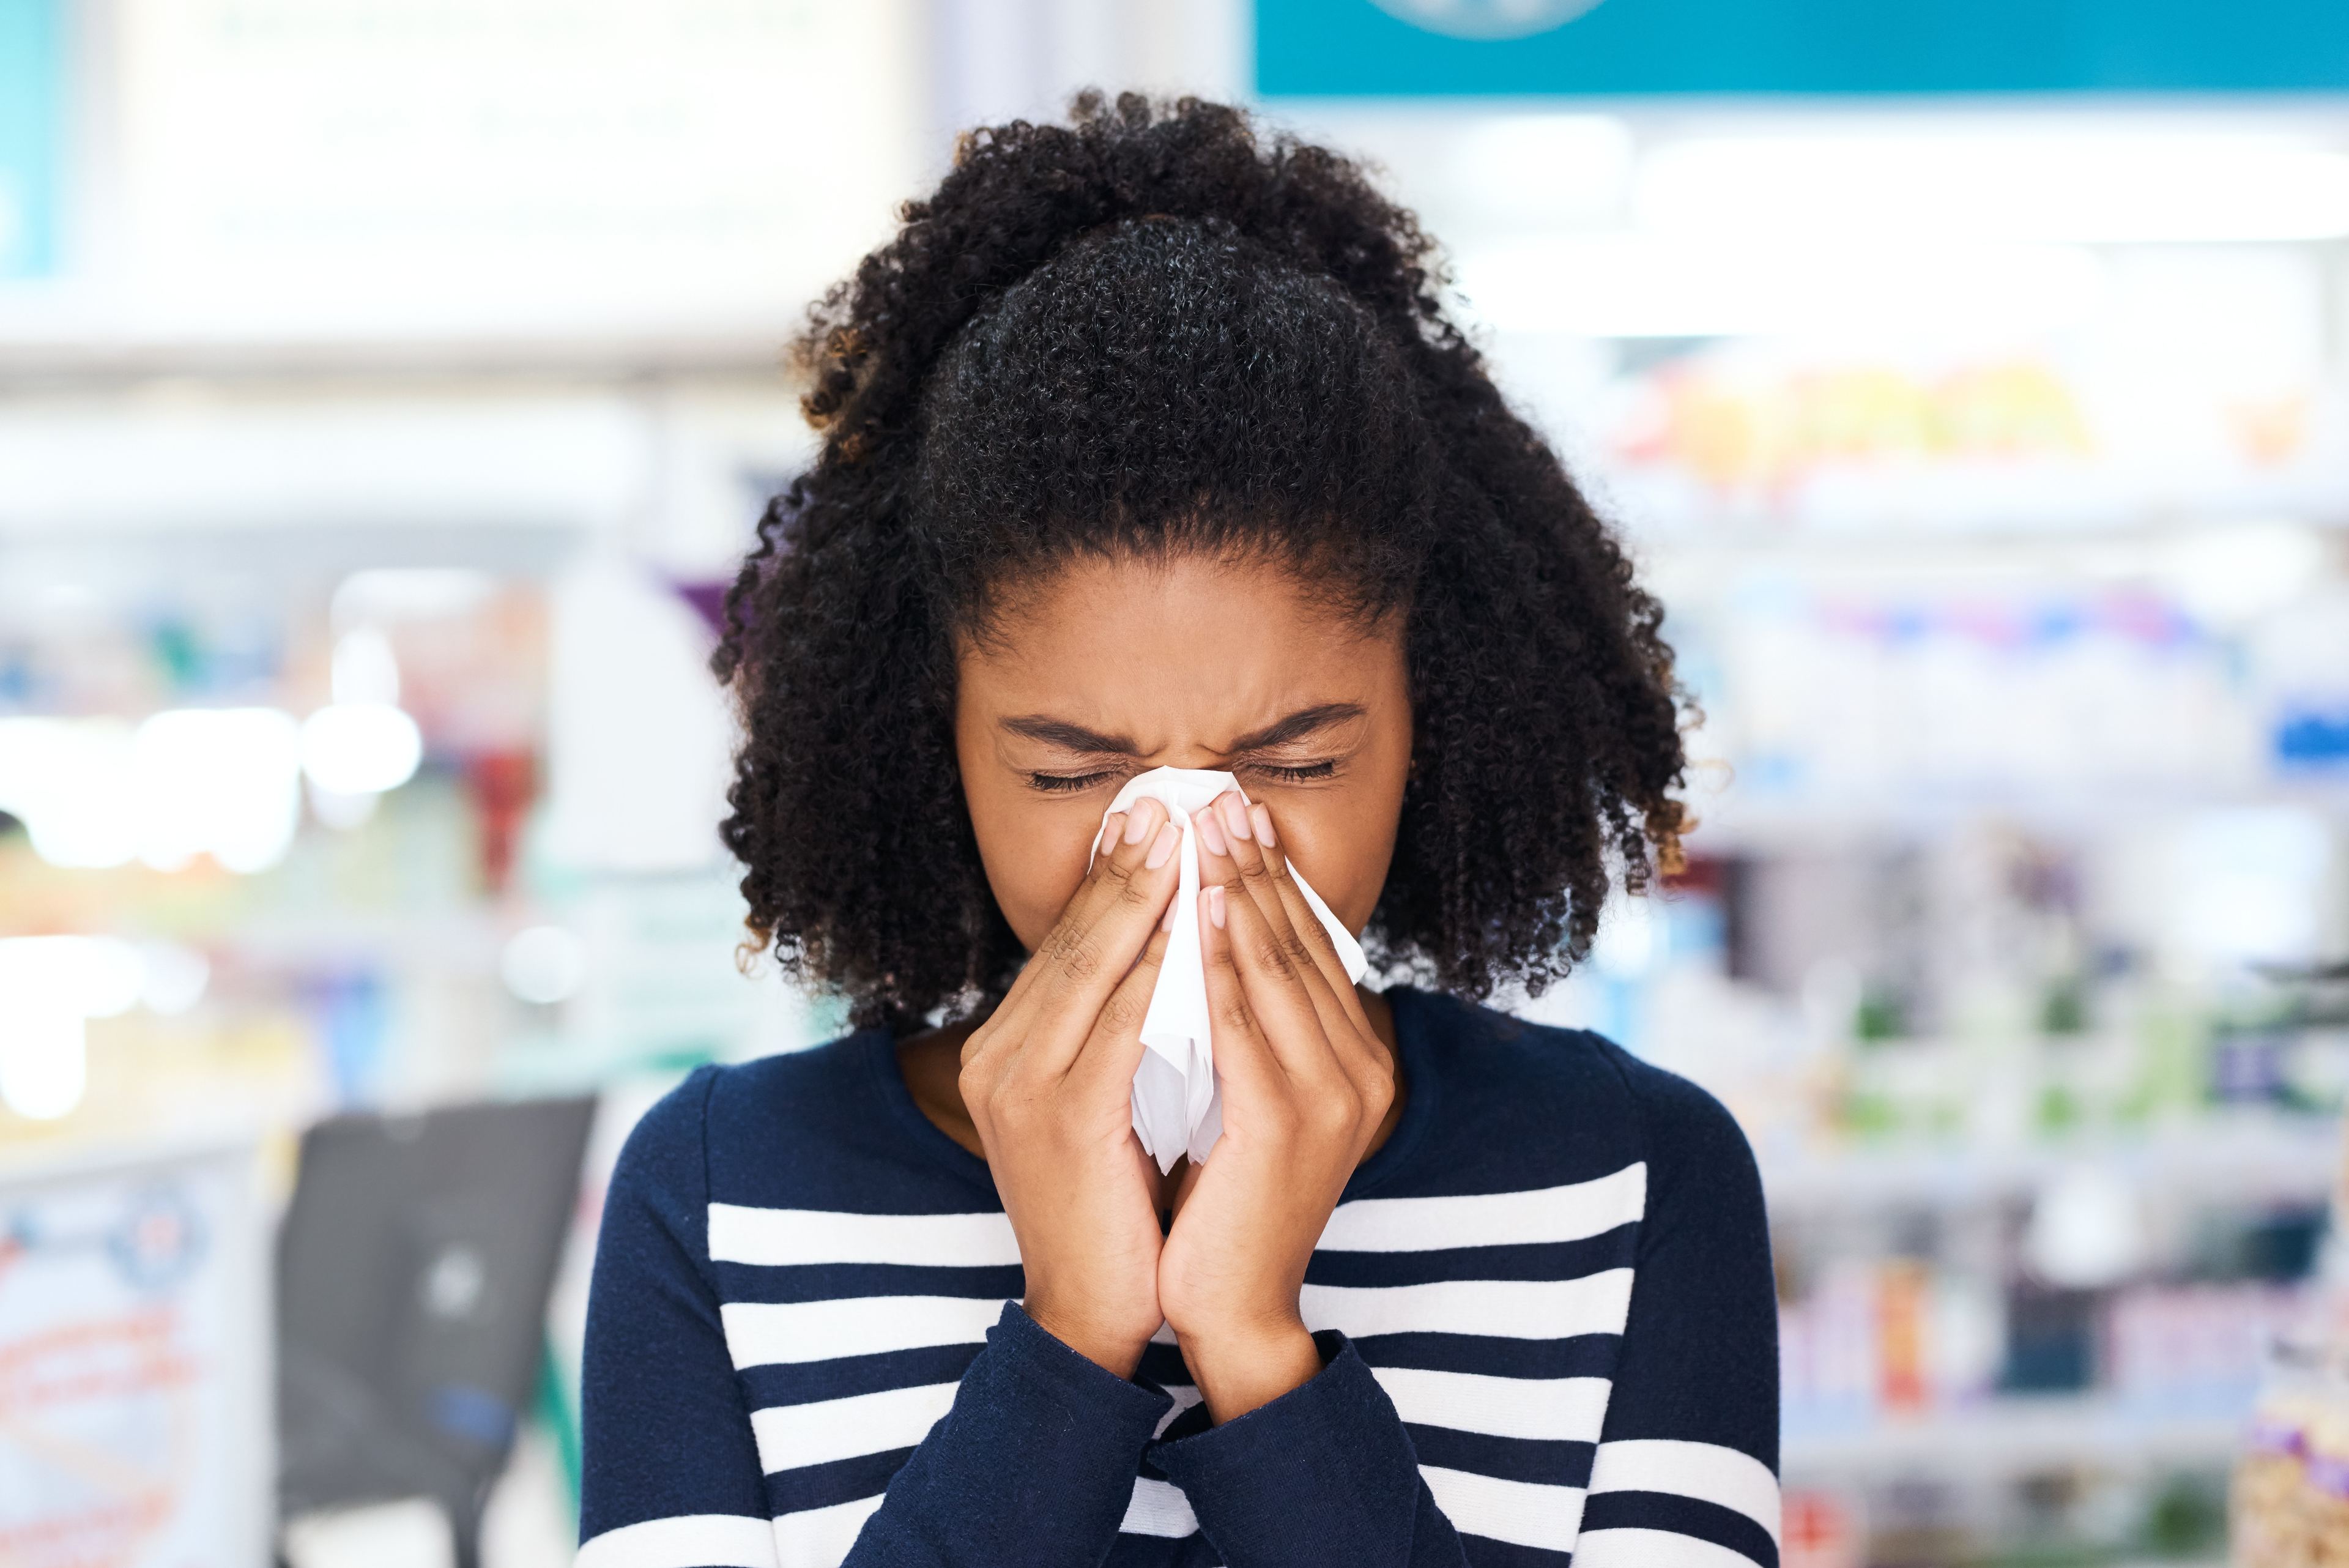 Spring Allergies Got You Down? Here Are 5 Must-Have Products To Beat The Sneeze